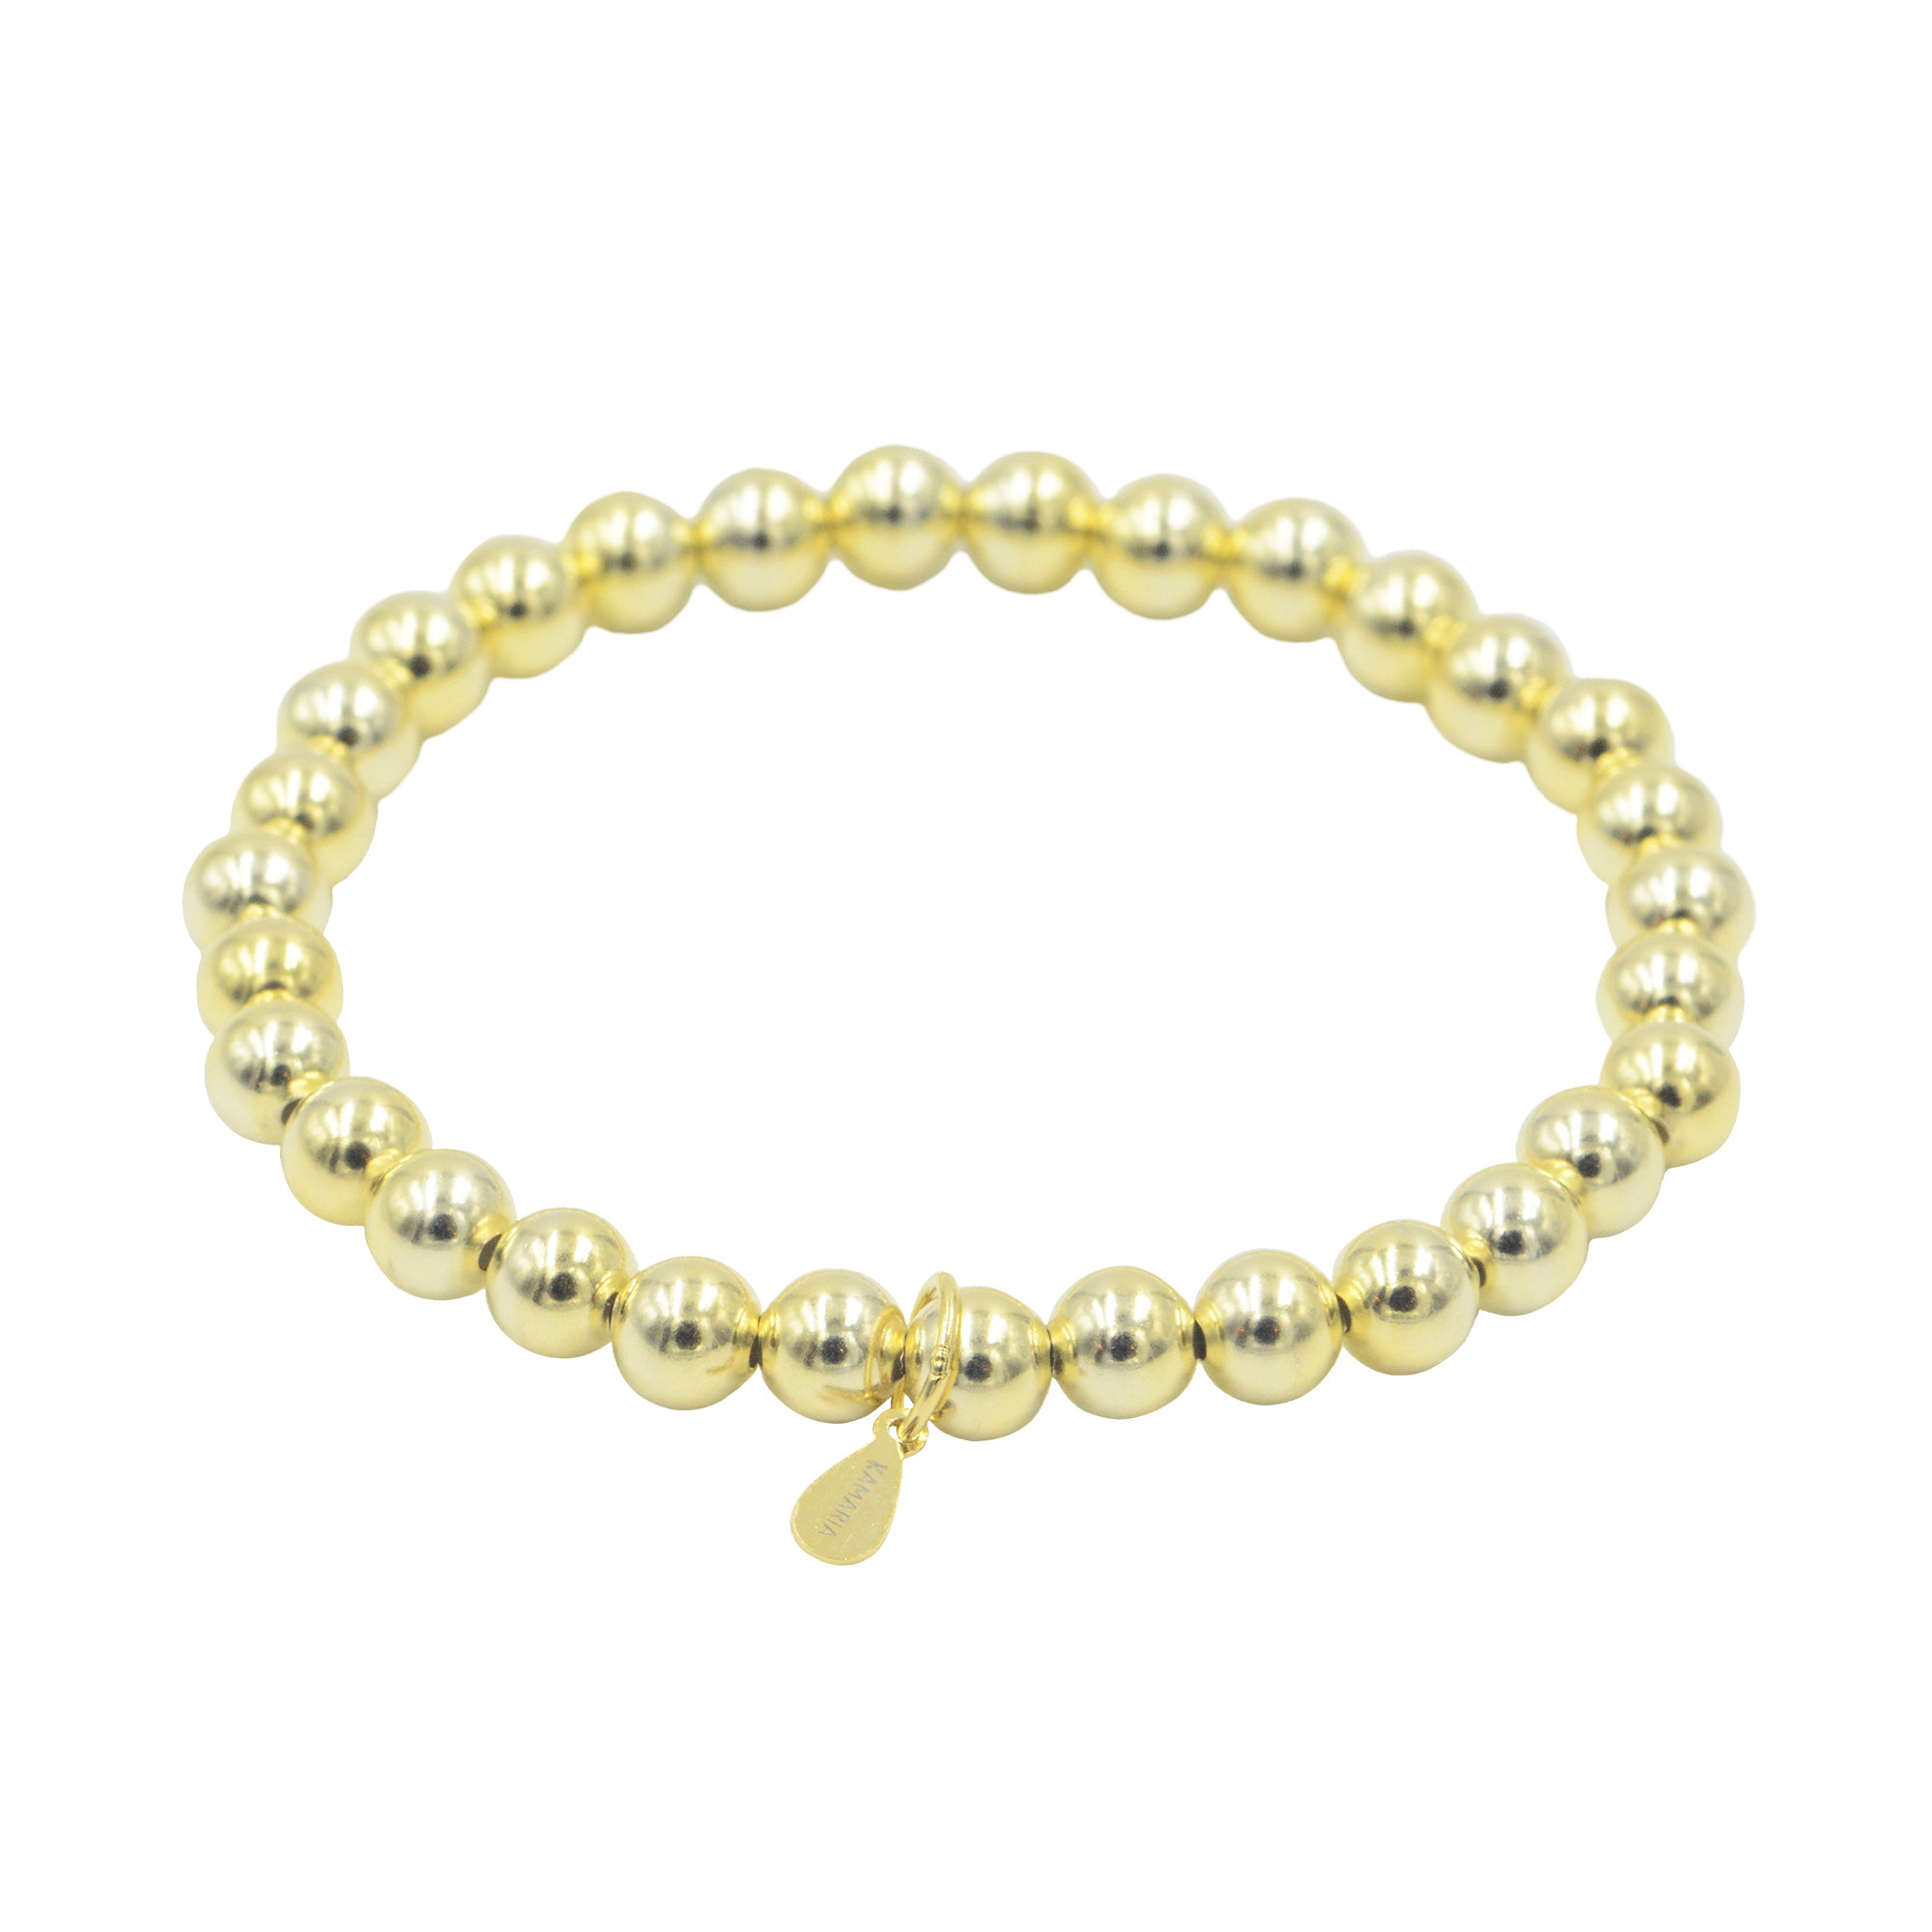 gold-plated silver beaded bracelet 6mm